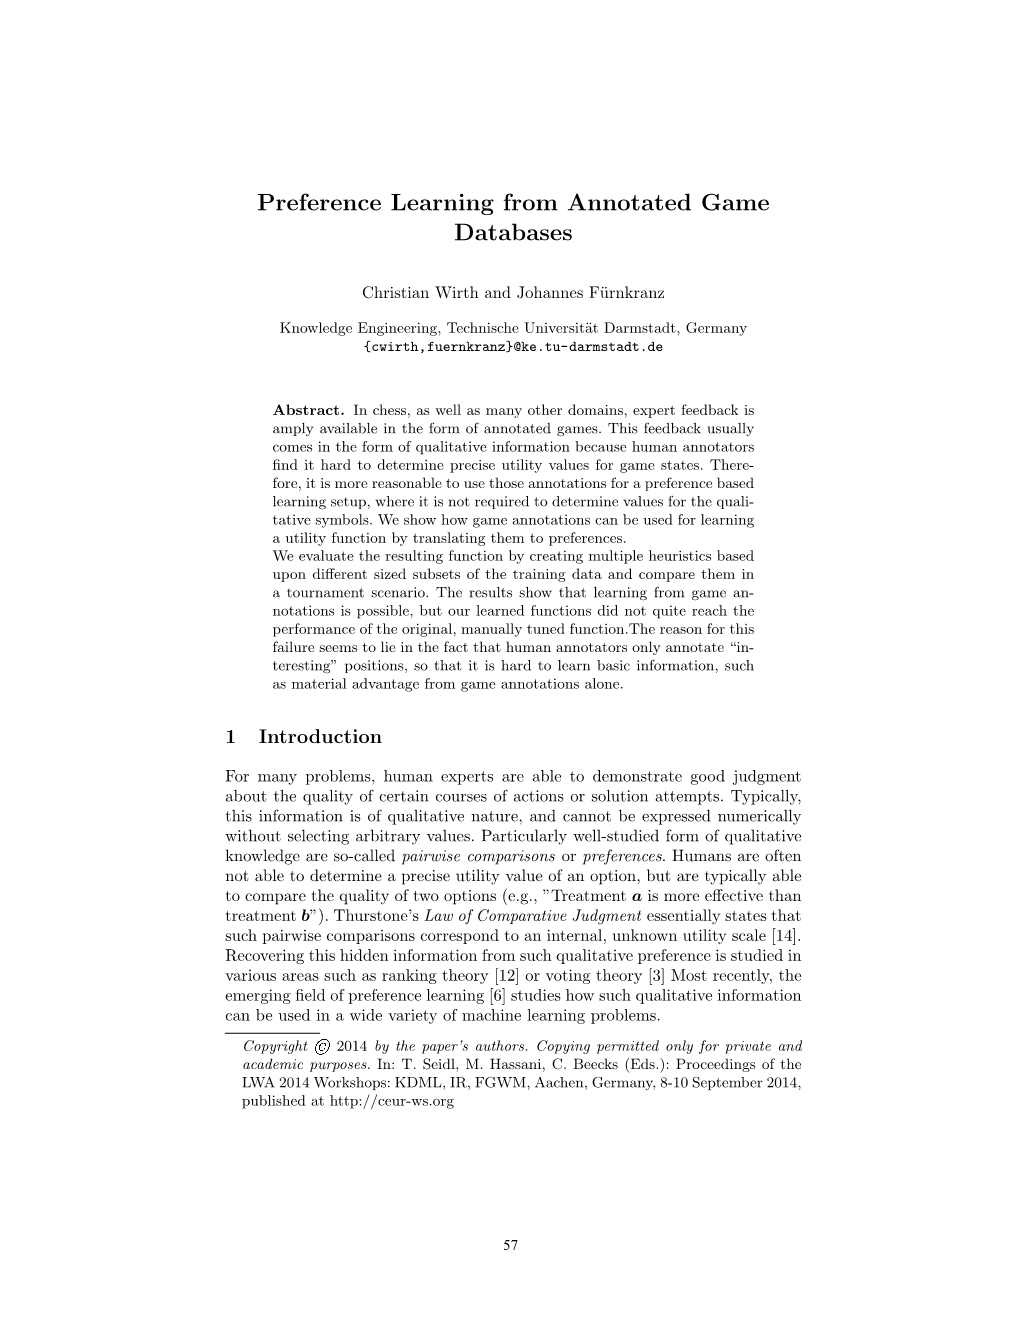 Preference Learning from Annotated Game Databases